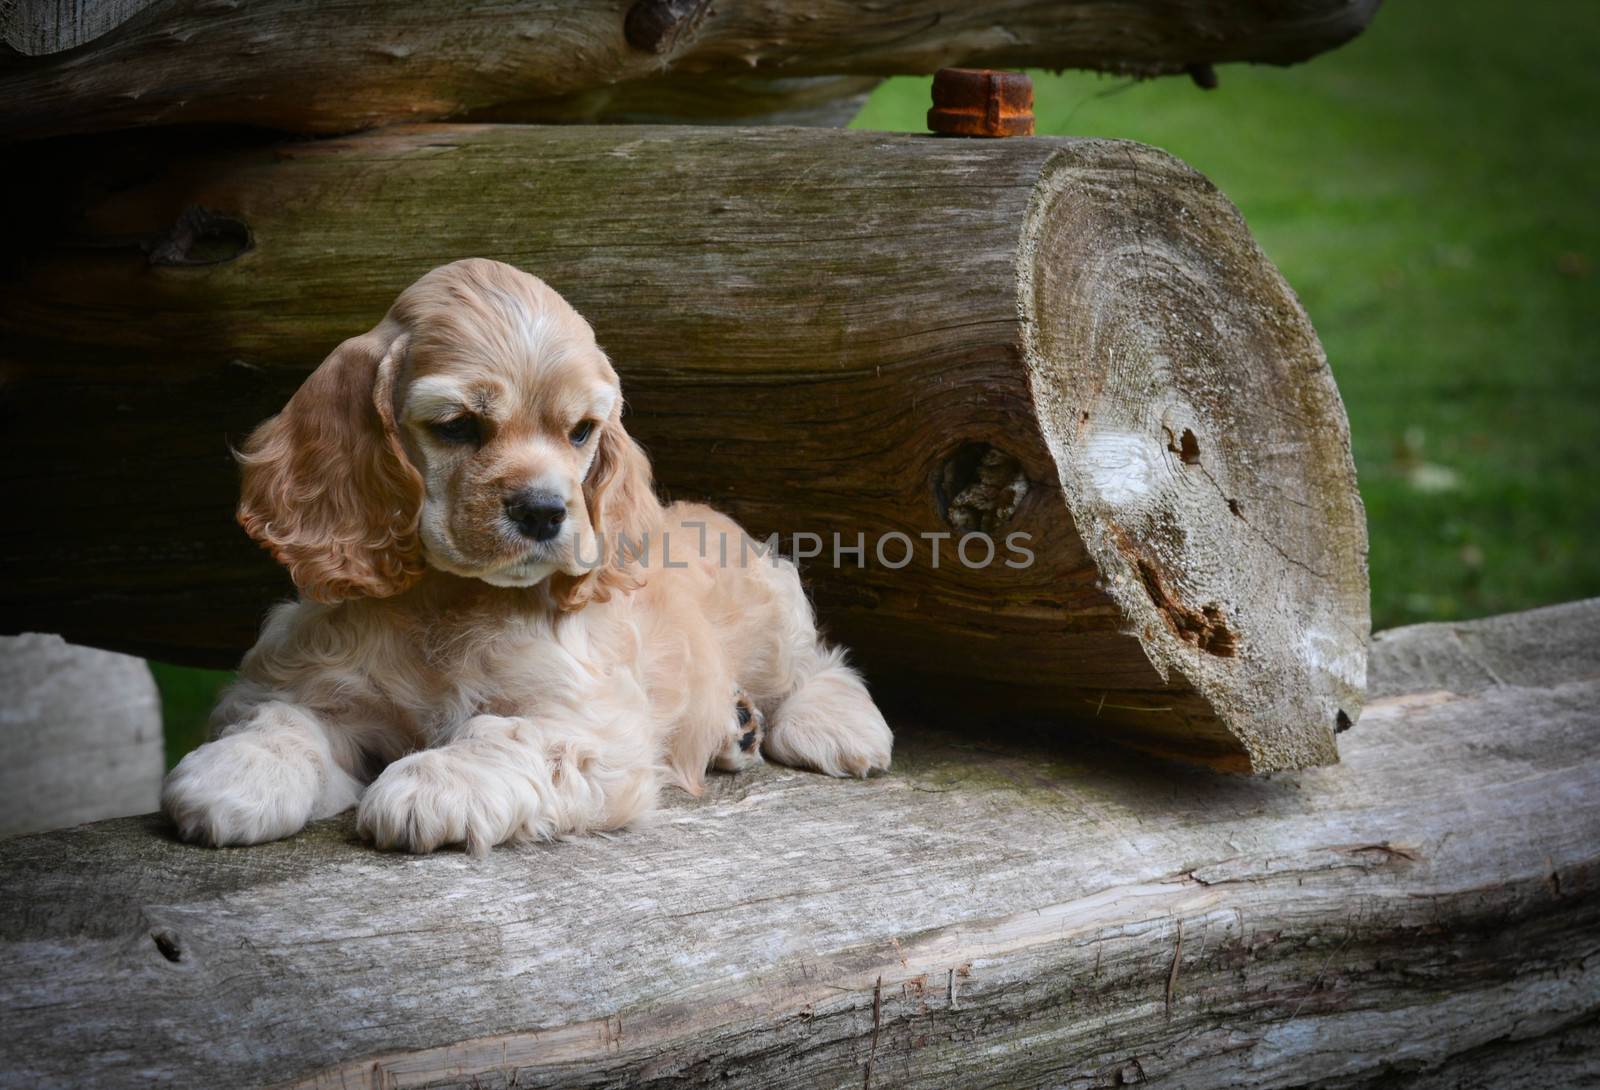 cute puppy - american cocker spaniel puppy laying on a rustic wooden log